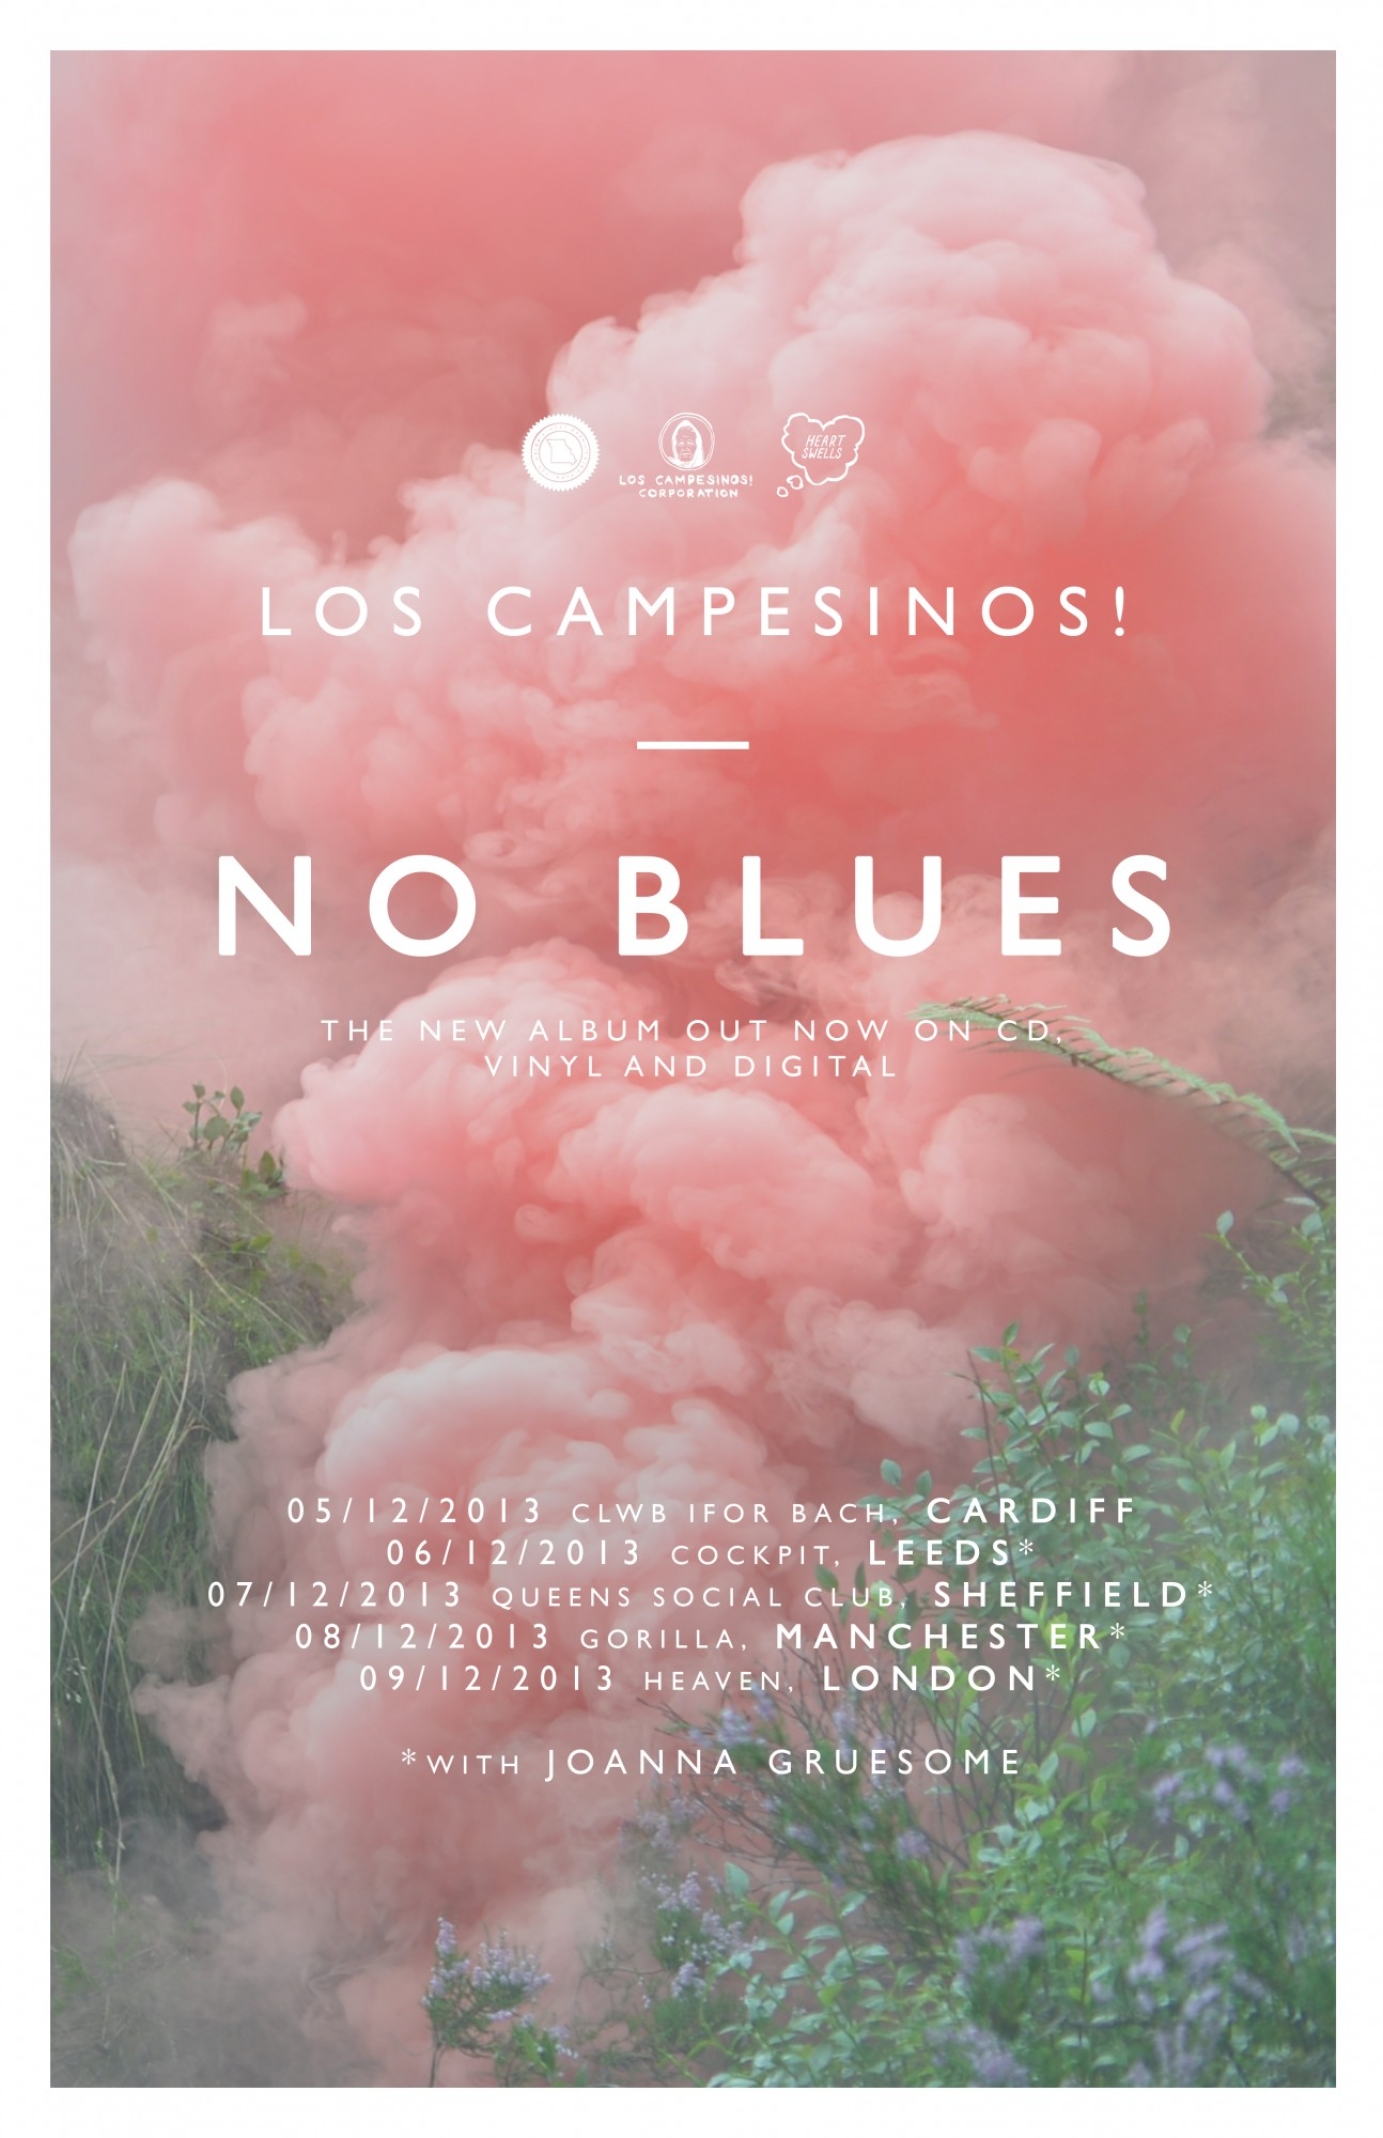 Creative direction for Los Campesinos! by R-Corp